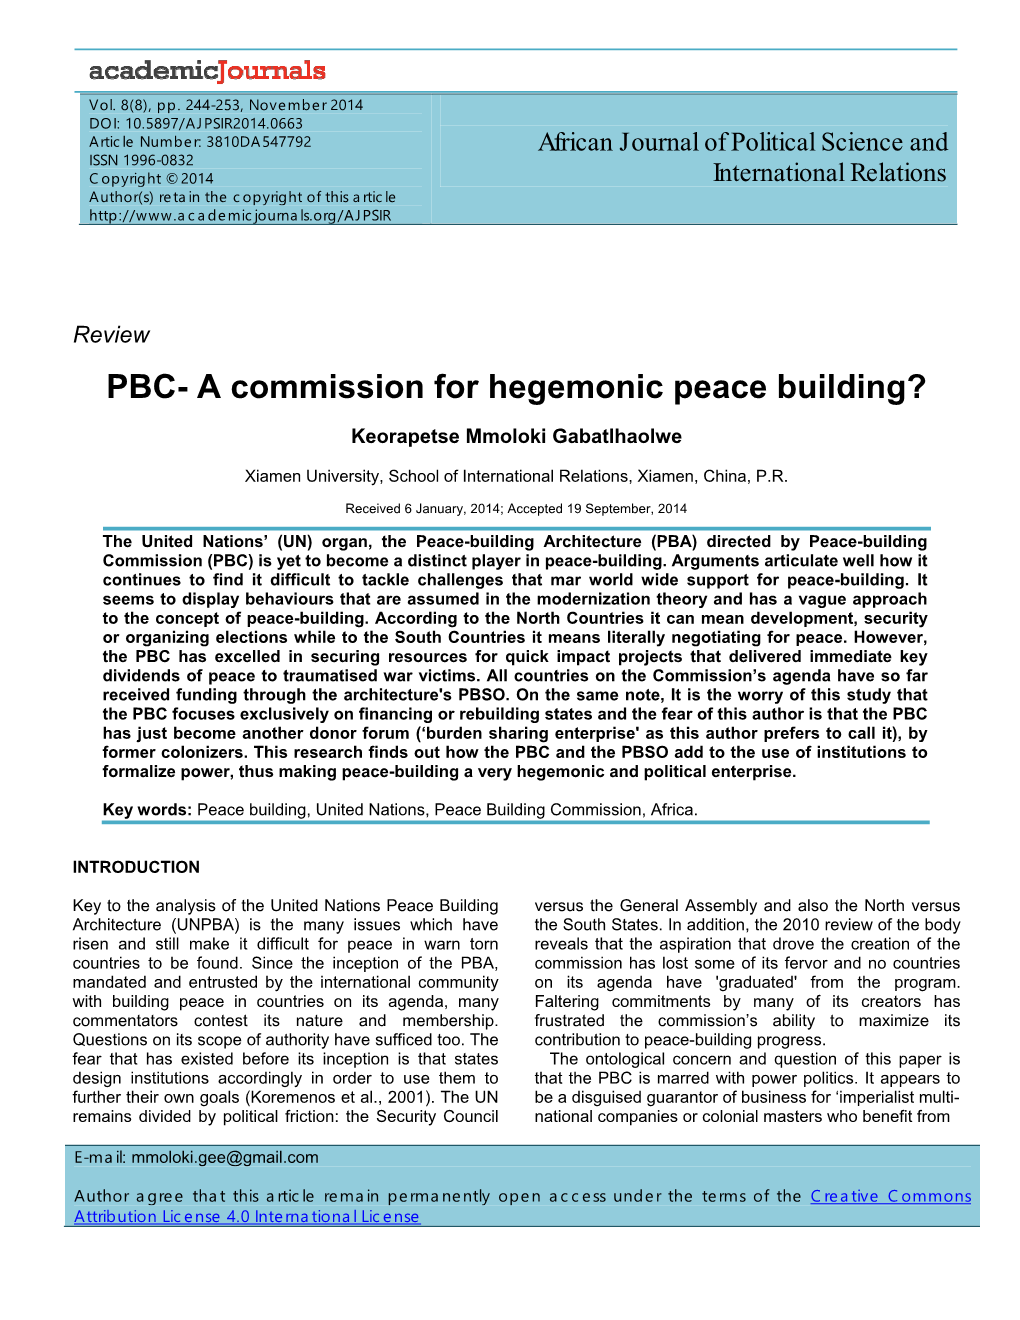 PBC- a Commission for Hegemonic Peace Building?